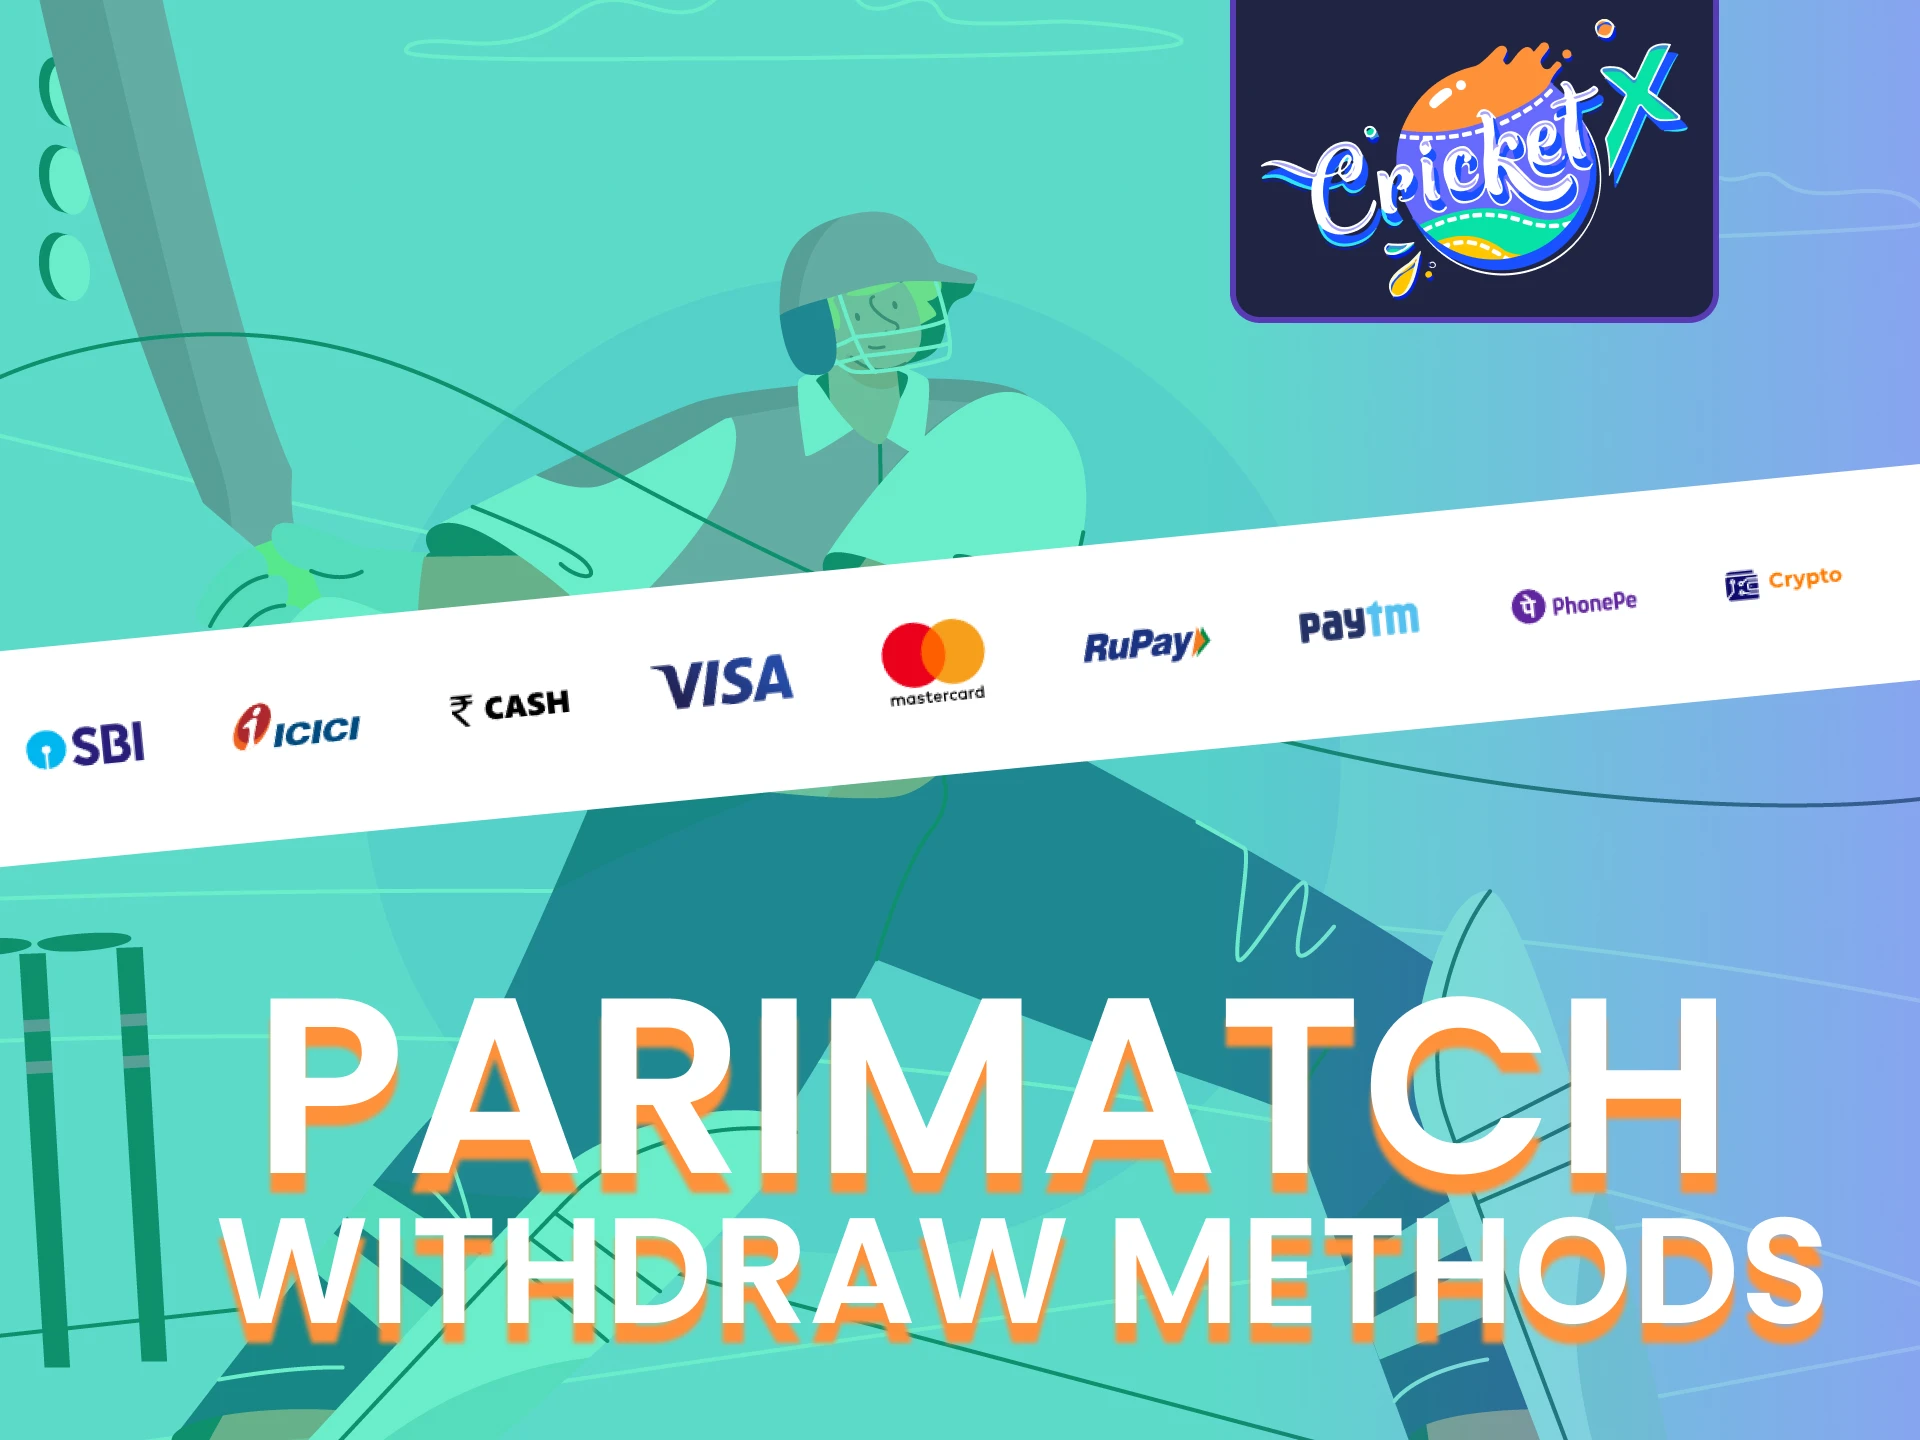 Find out how to withdraw funds on the Parimatch website.